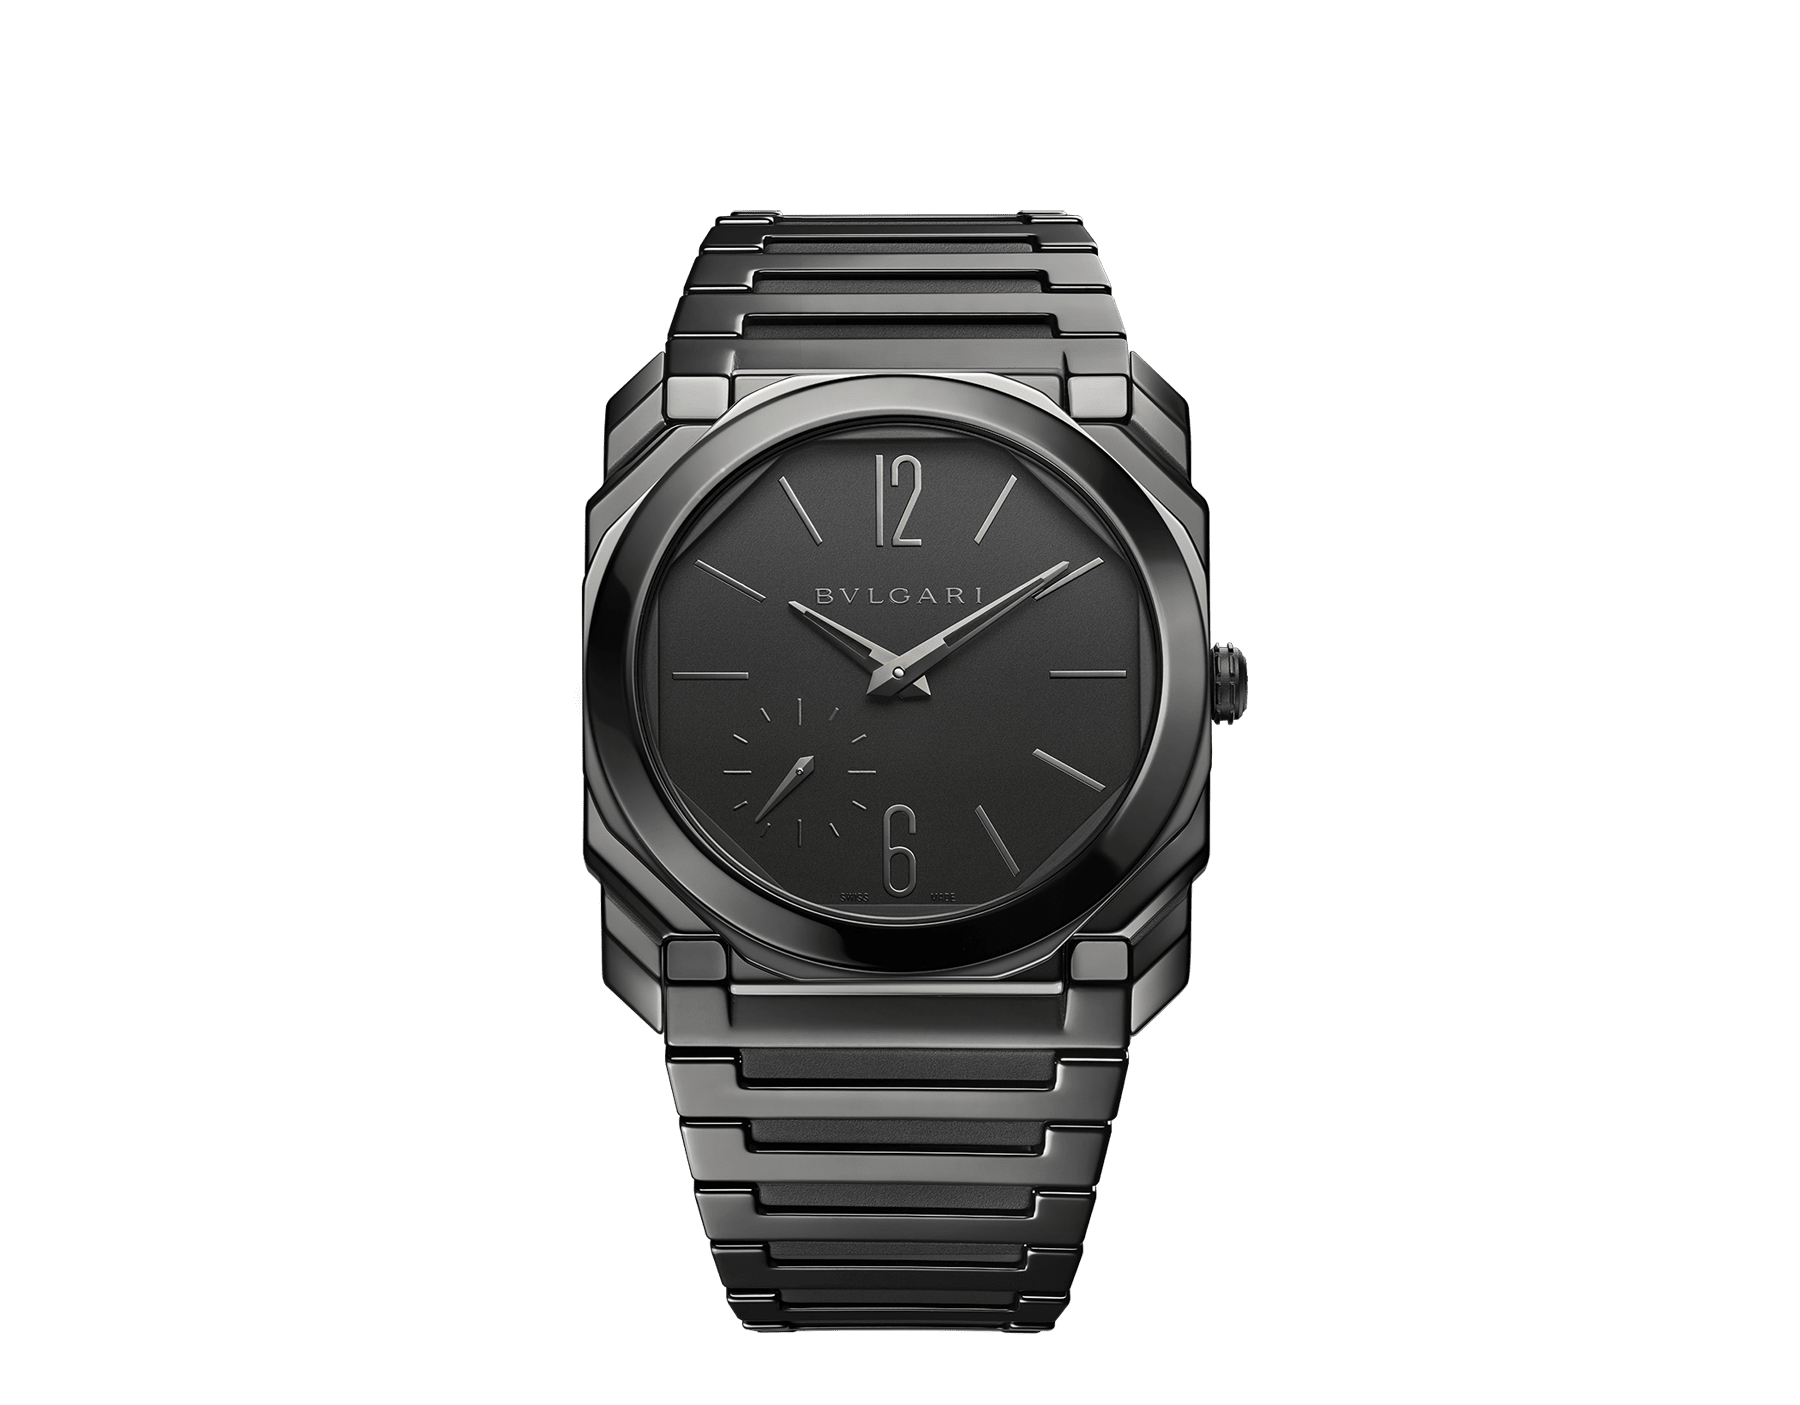 Octo Finissimo watch in sandblasted polished black ceramic with extra-thin mechanical manufacture movement, automatic winding, platinum microrotor, small seconds, transparent case back and sandblasted black ceramic dial. Water-resistant up to 30 metres 103368 image 1